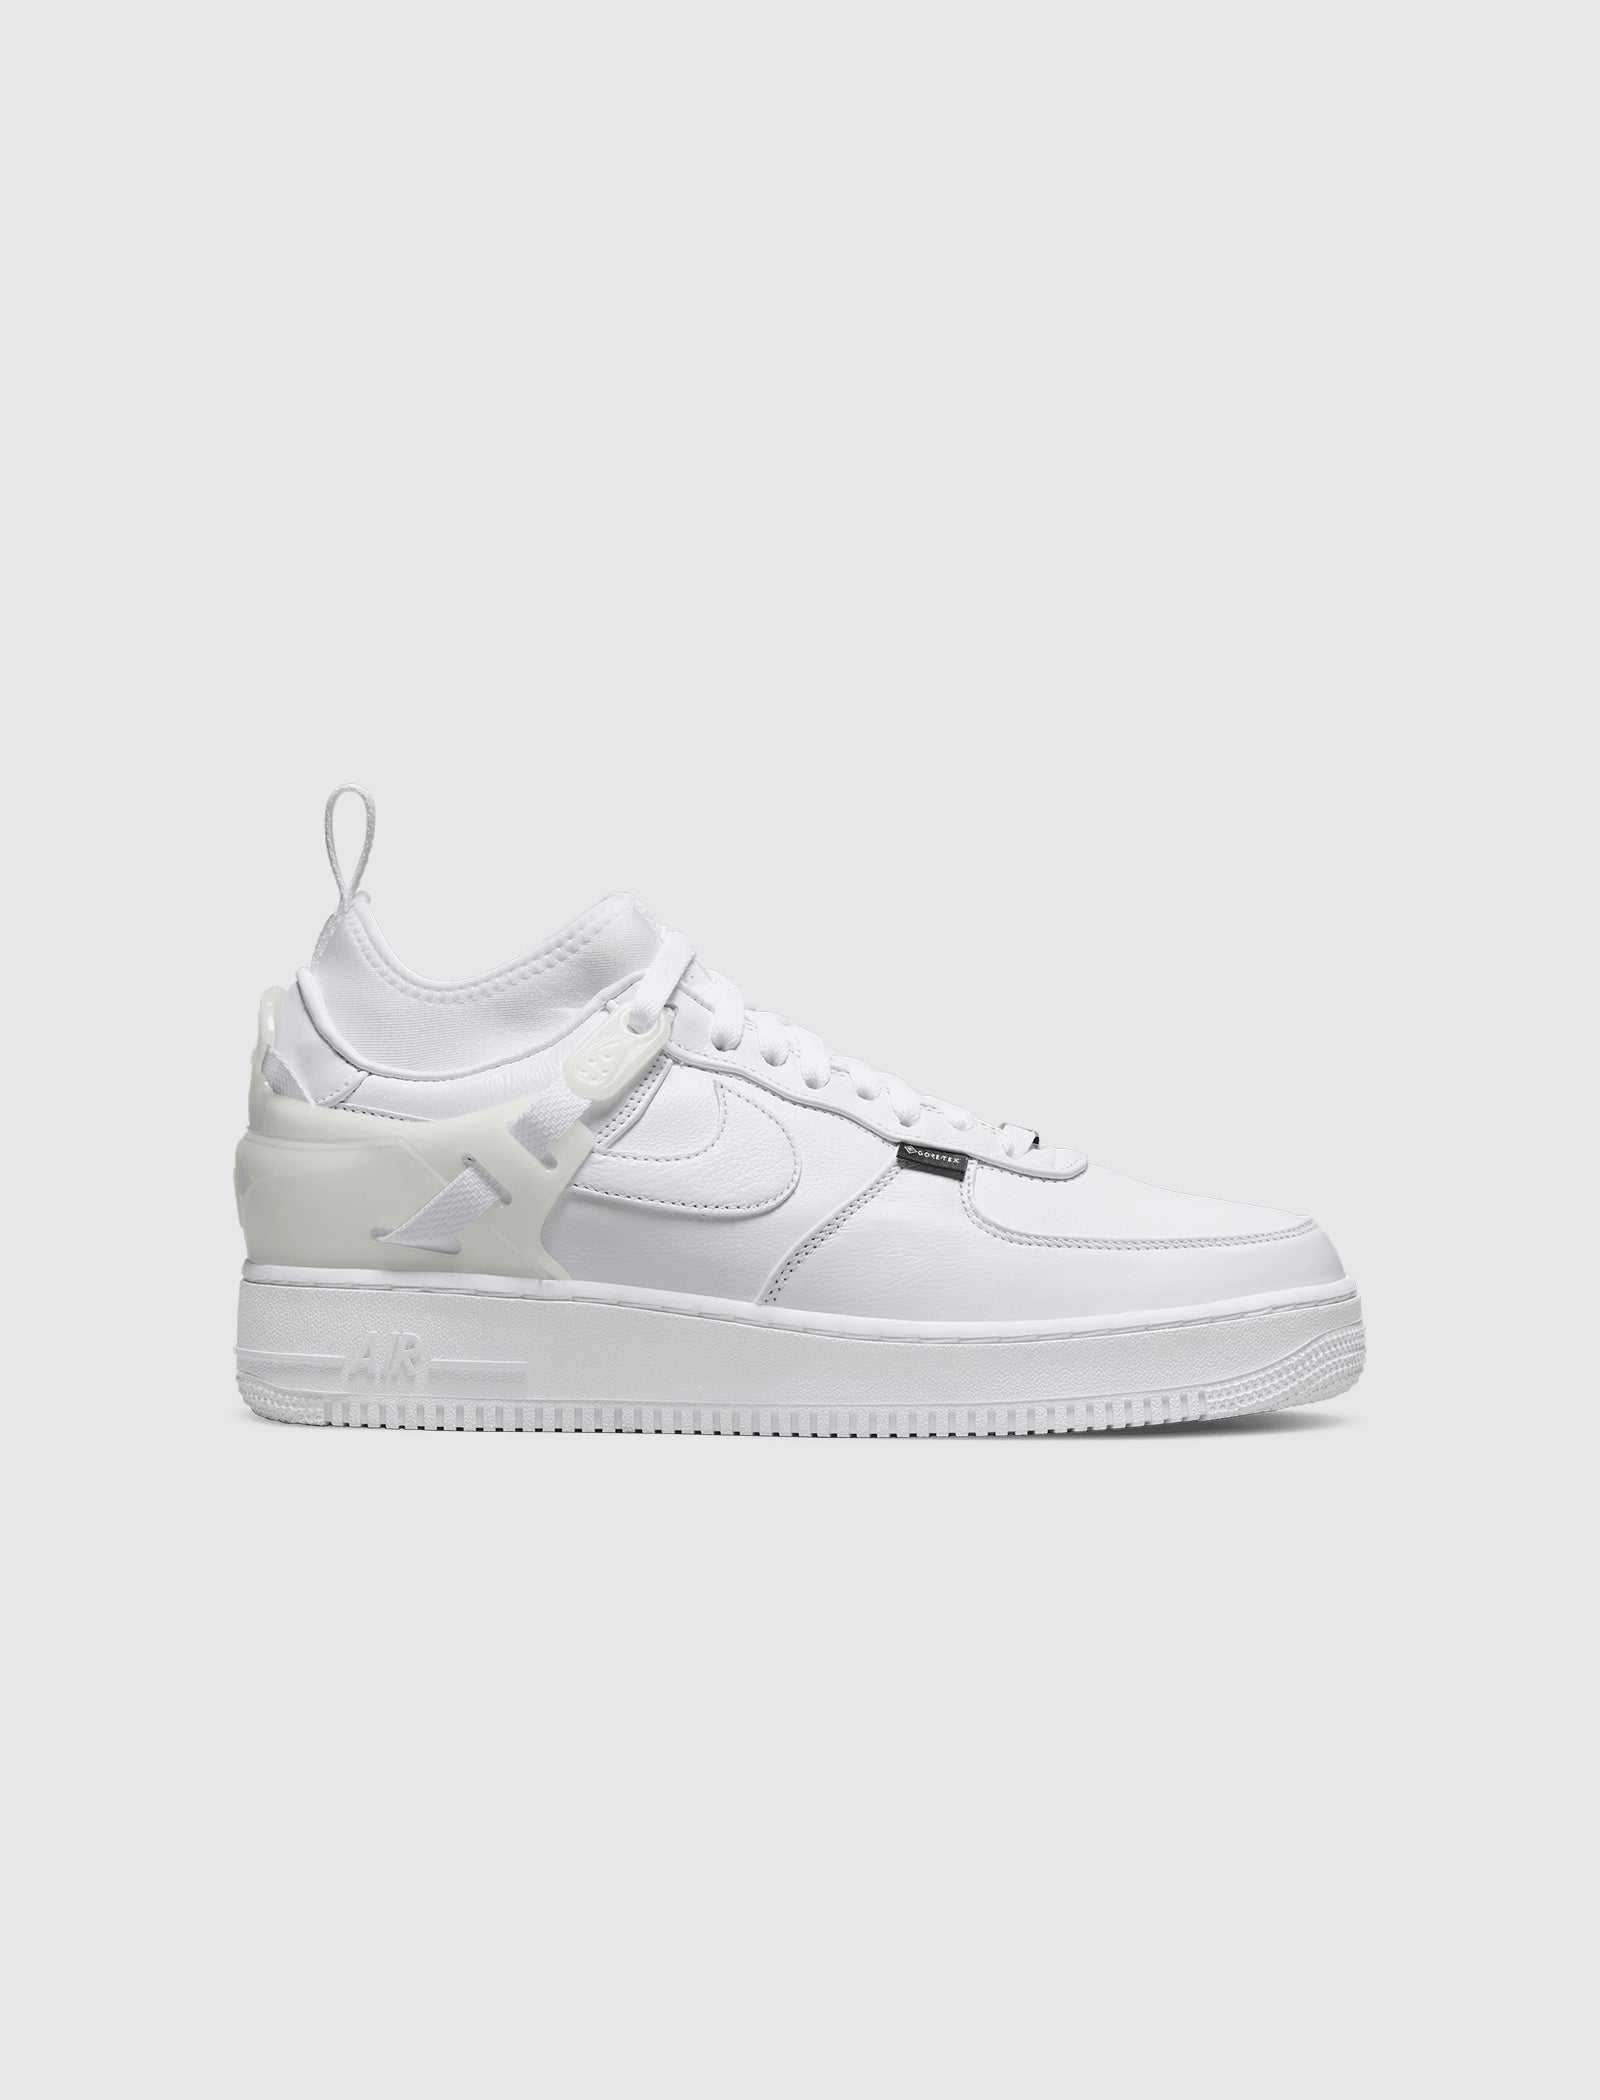 UNDERCOVER X AIR FORCE 1 LOW SP 